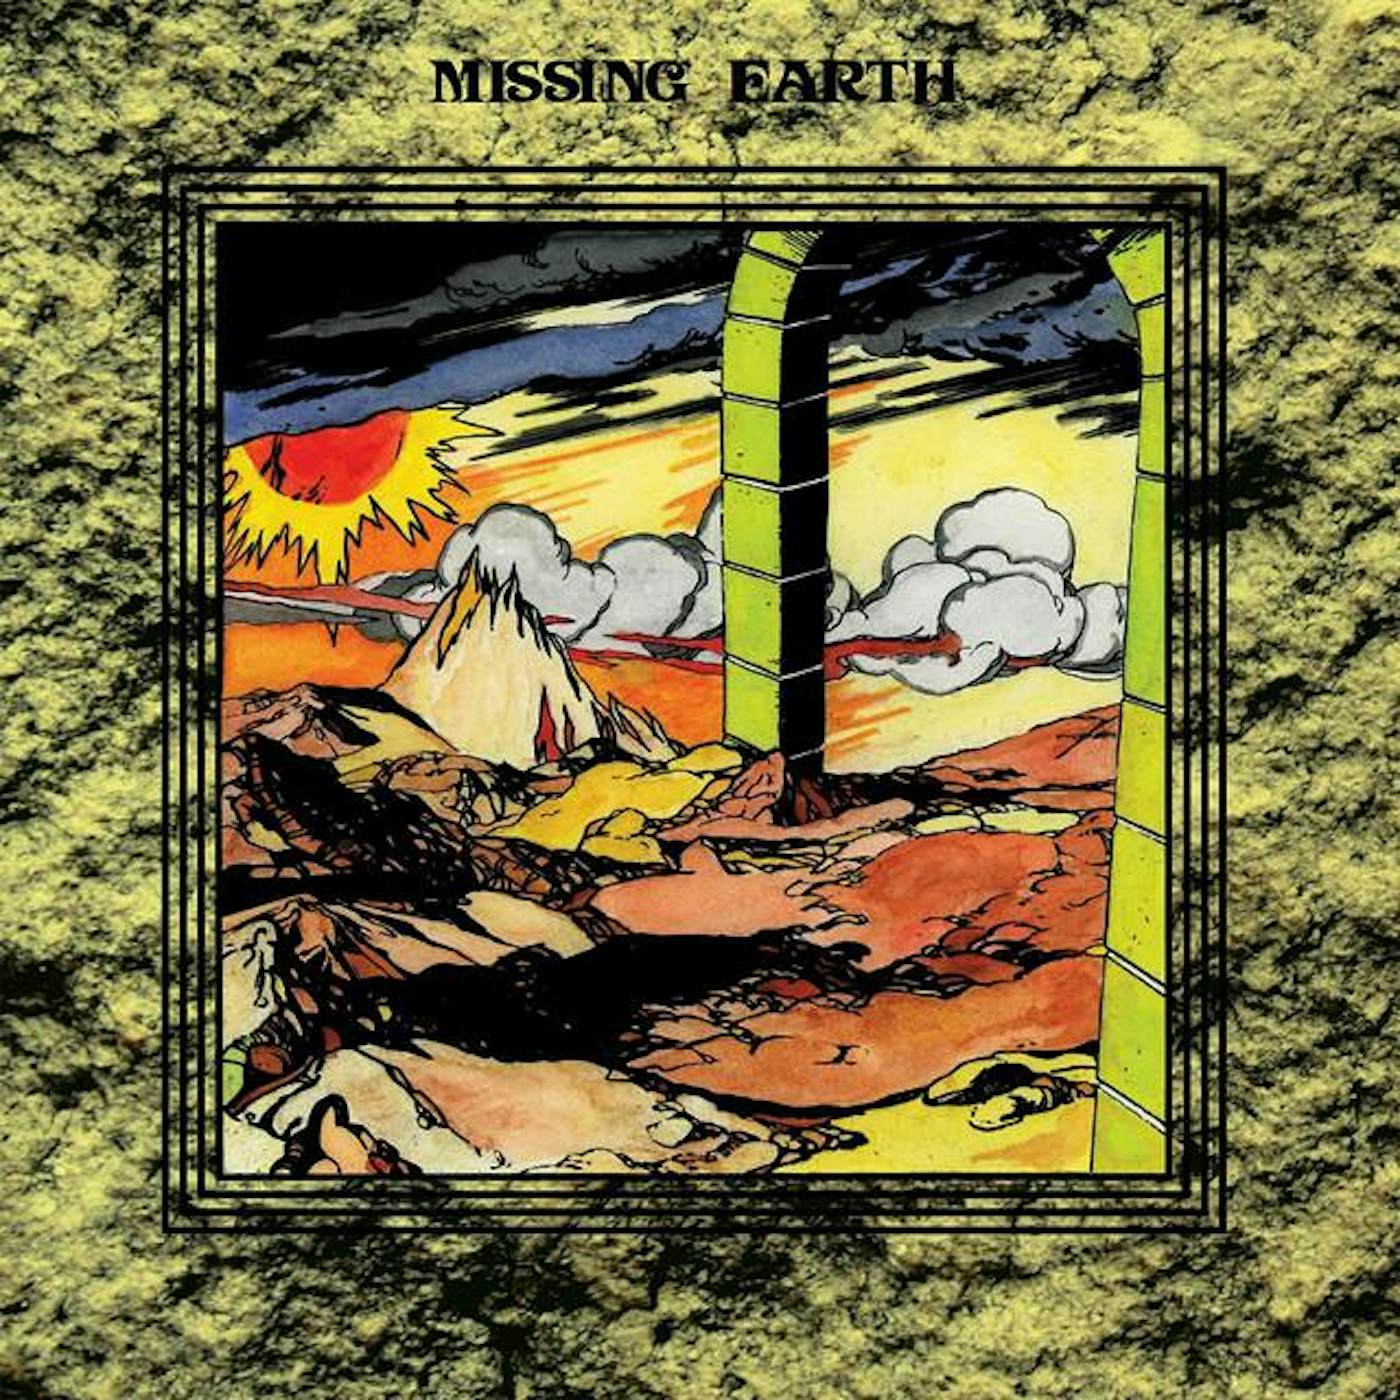 Missing Earth